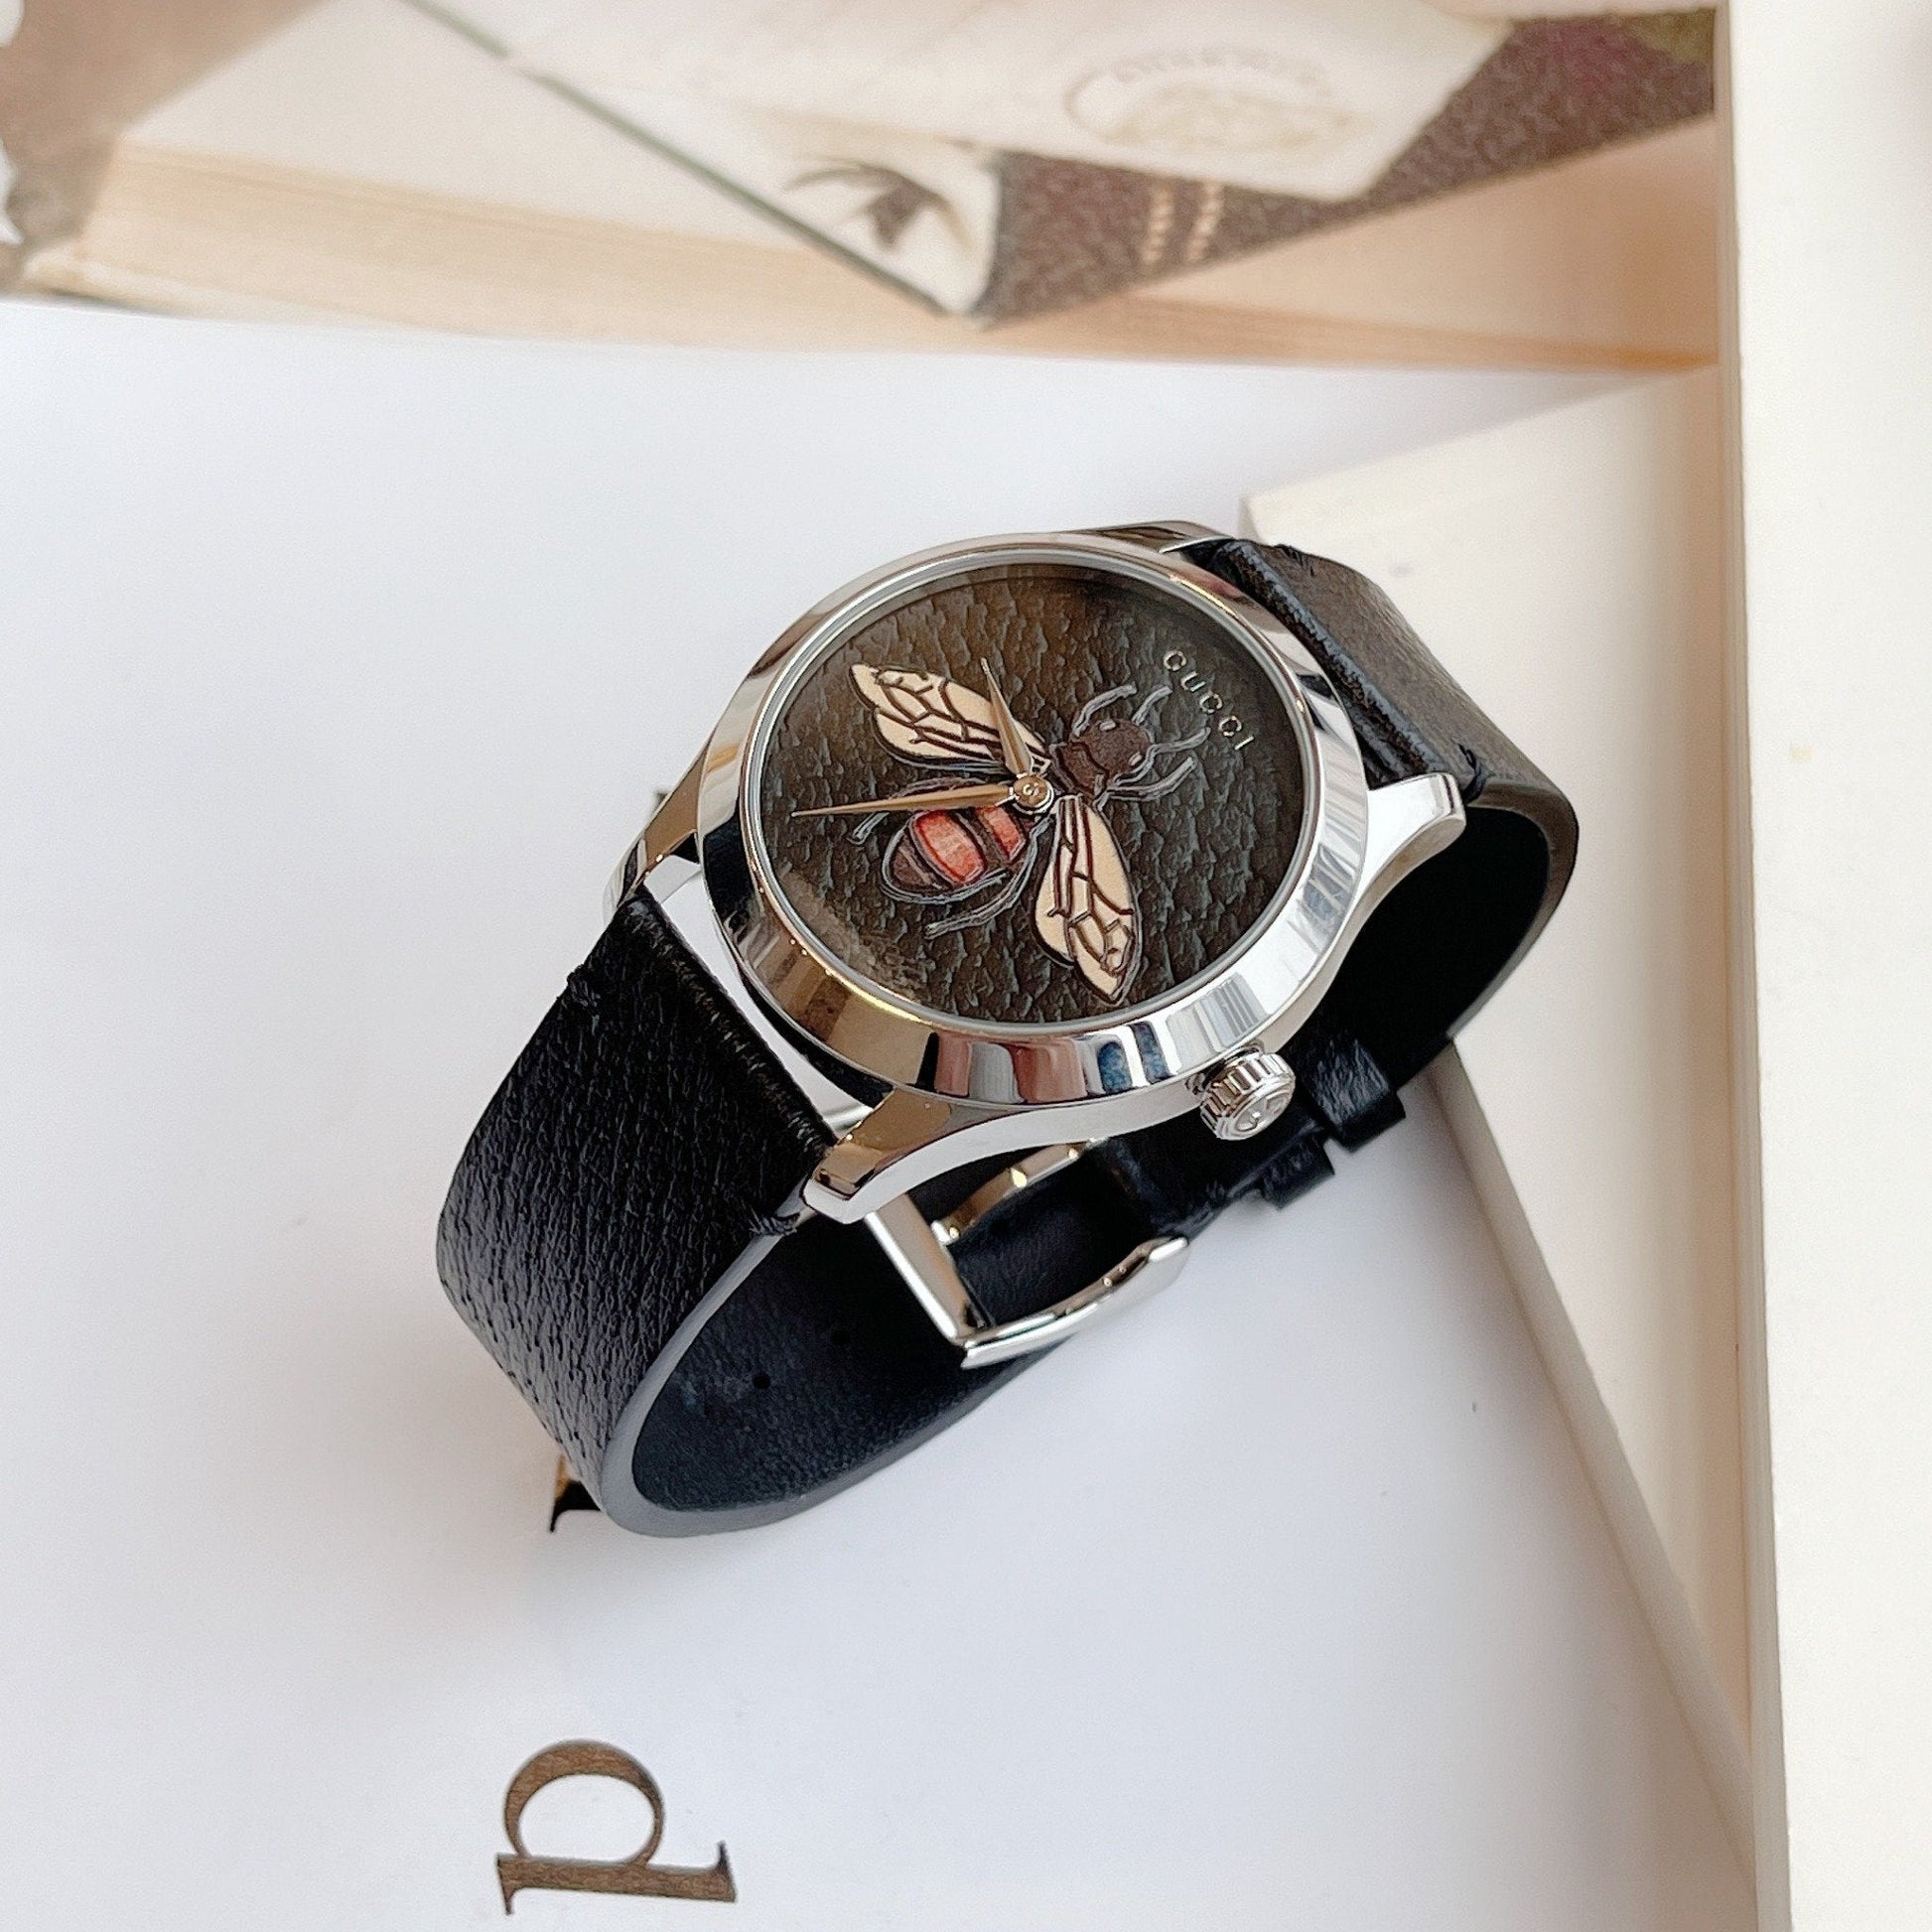 Gucci G Timeless Black Dial Black Leather Watch For Women - YA1264067